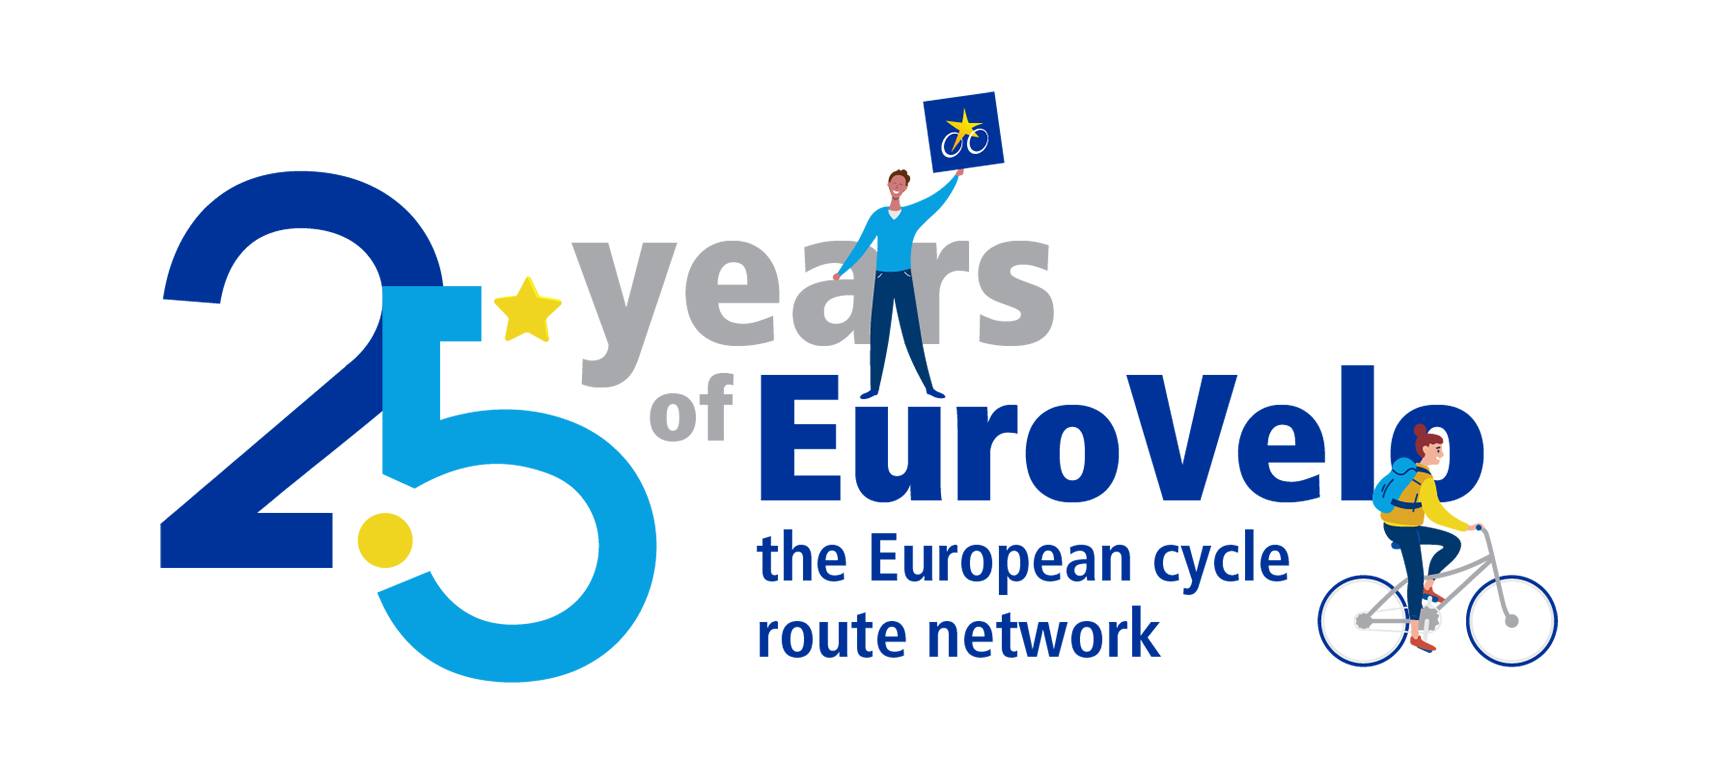 EuroVelo 25 years cycle routes in Europe.jpg